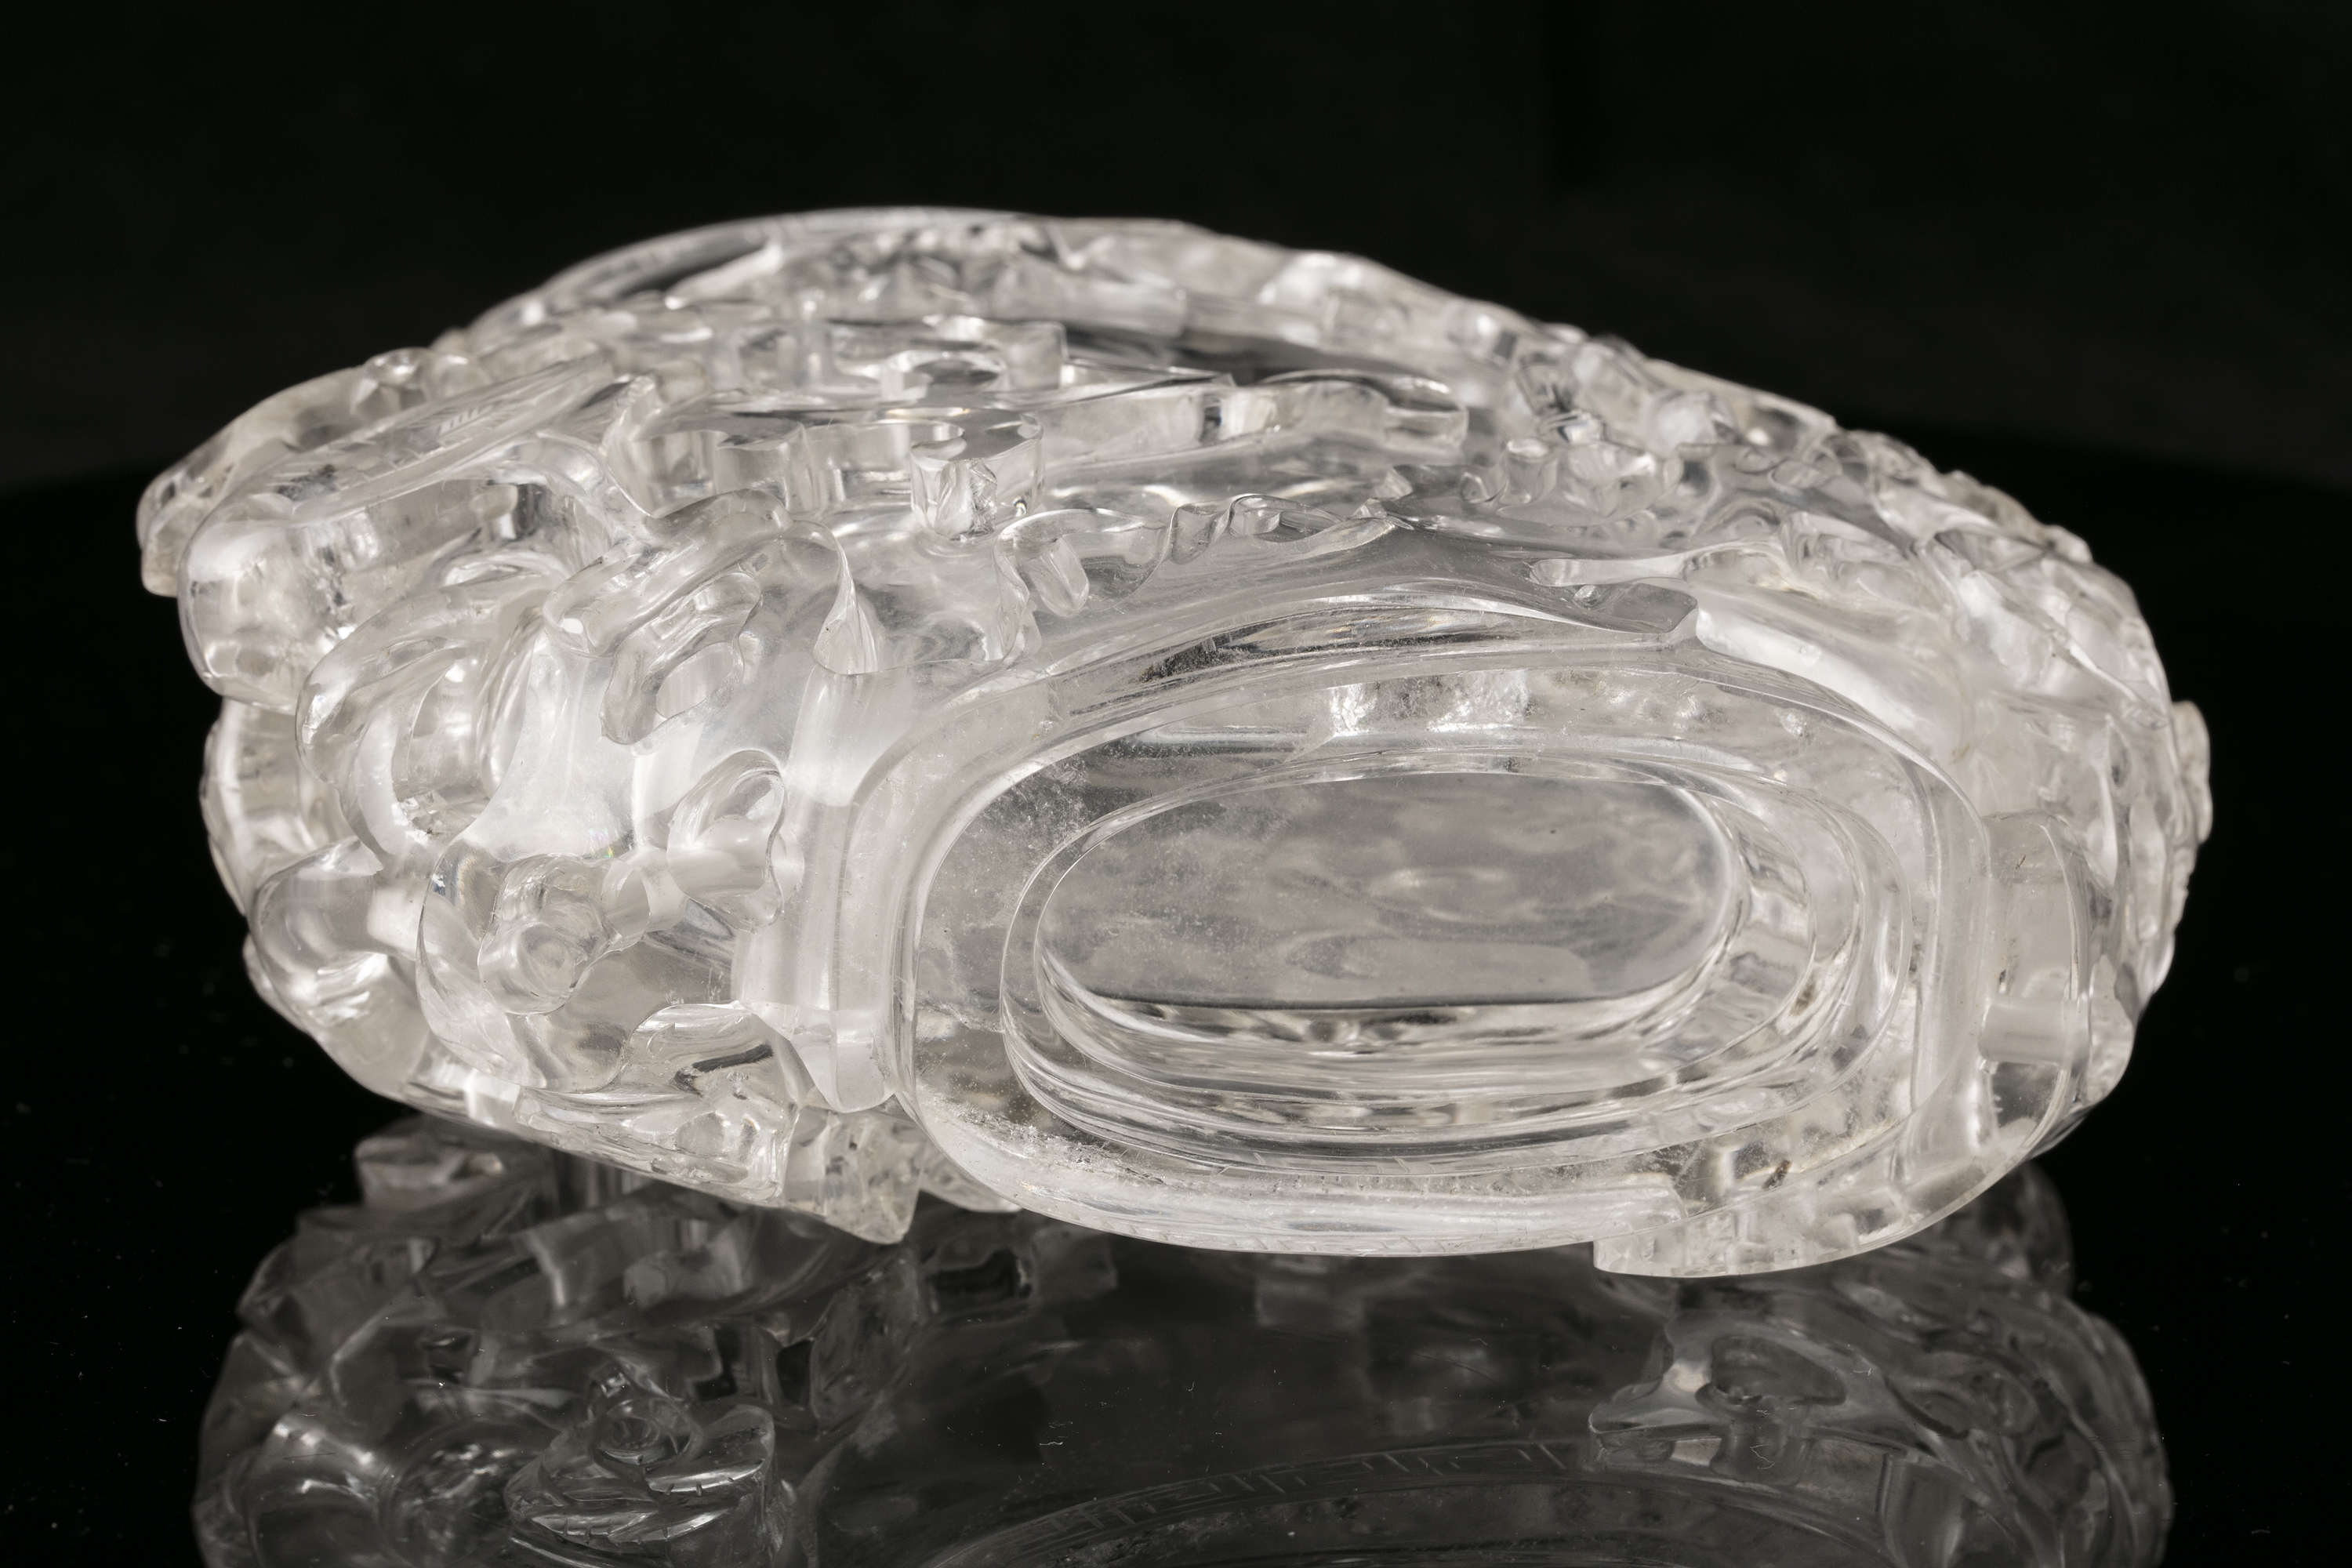 A LARGE ROCK-CRYSTAL LIDDED VASE WITH LOOSE RINGS HANDLES China, Qing Dynasty, 19th century Carved - Image 40 of 42